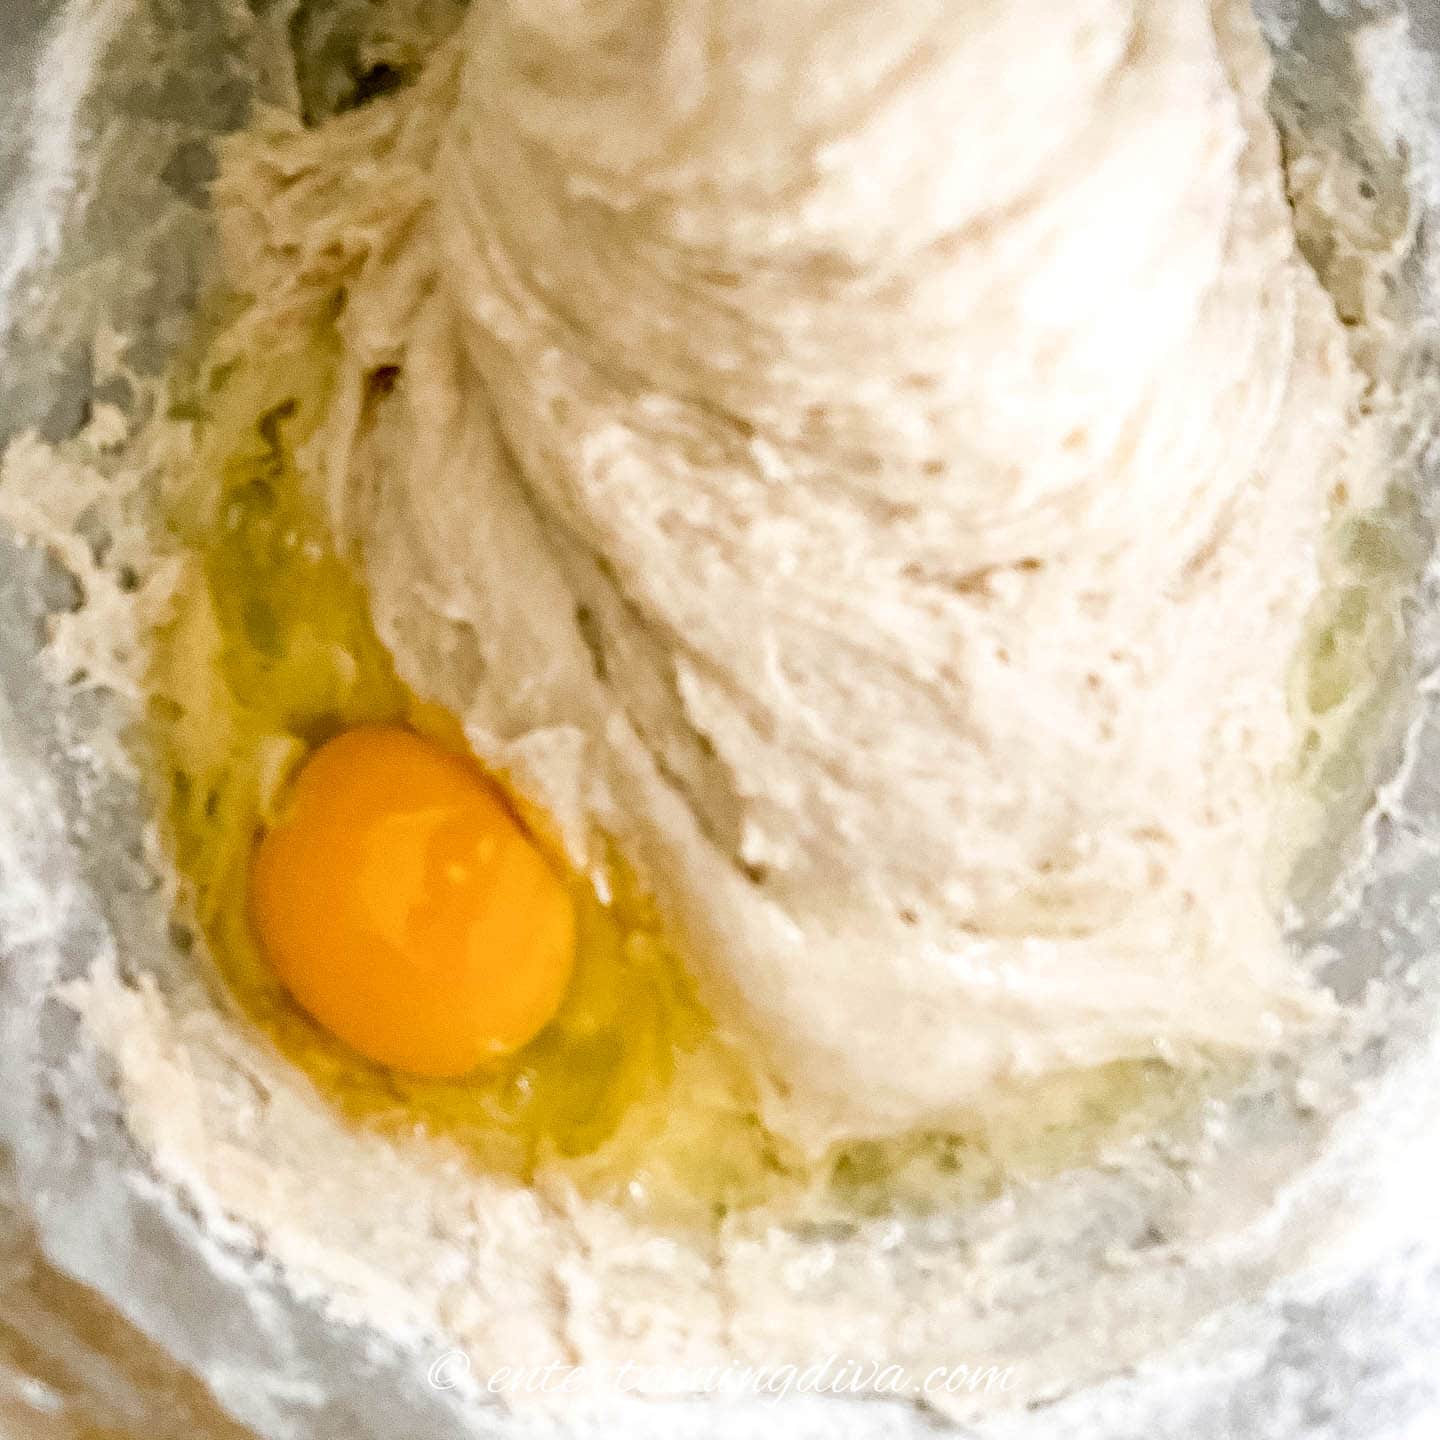 Egg and cinnamon roll dough in a mixing bowl